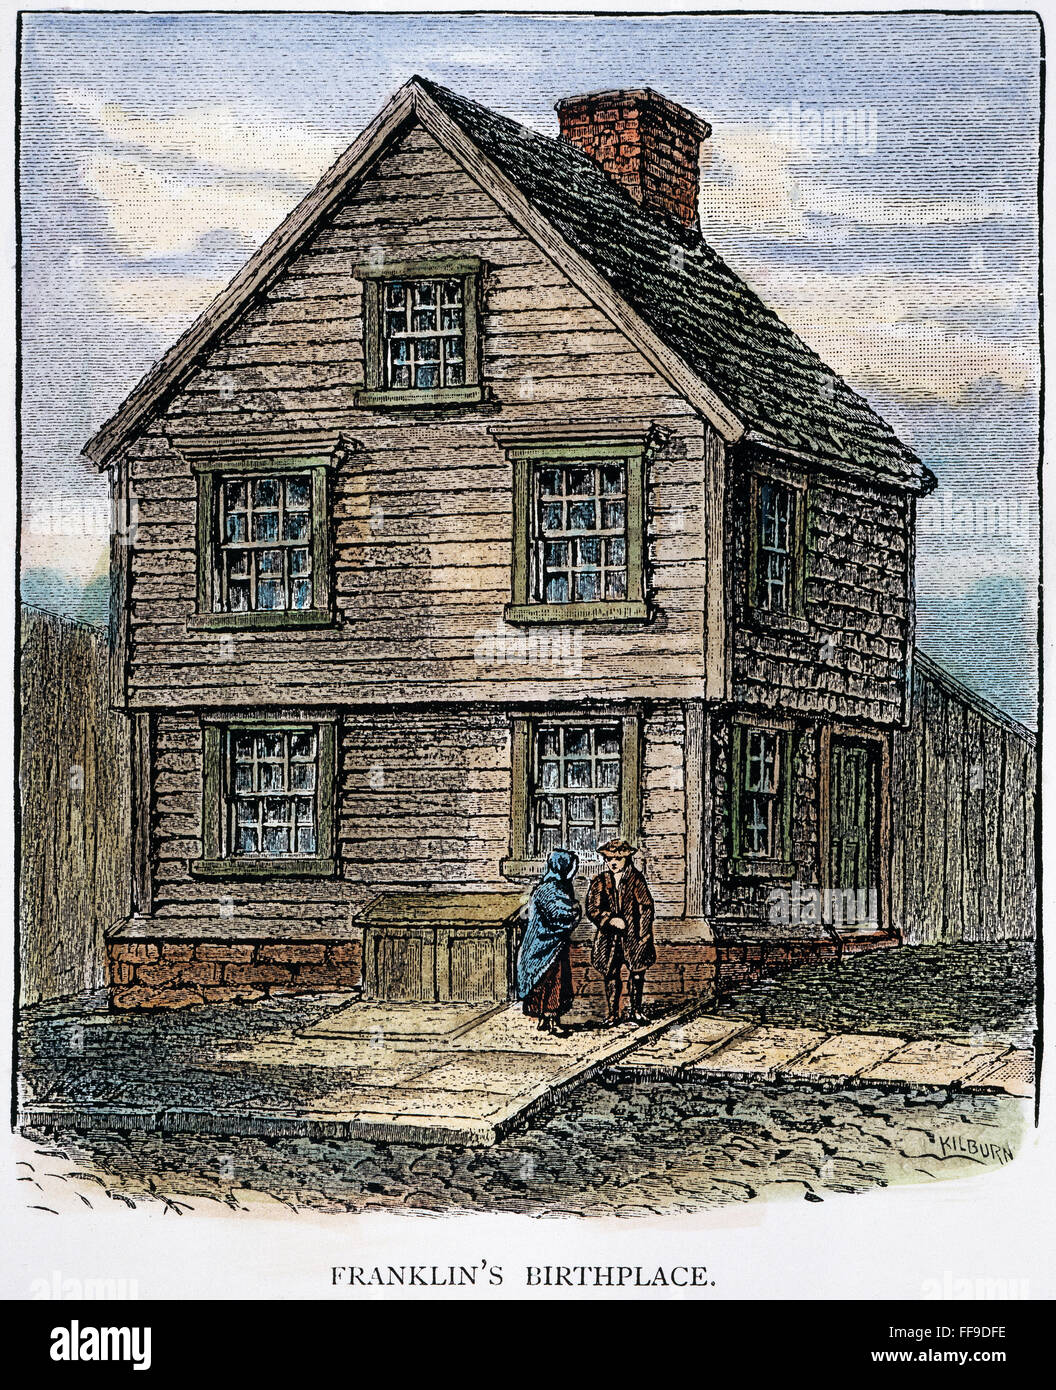 BENJAMIN FRANKLIN (1706-1790). /nAmerican printer, publisher, scientist, inventor, statesman and diplomat. Birthplace of Franklin in Boston, Mass. Wood engraving, 19th century. Stock Photo